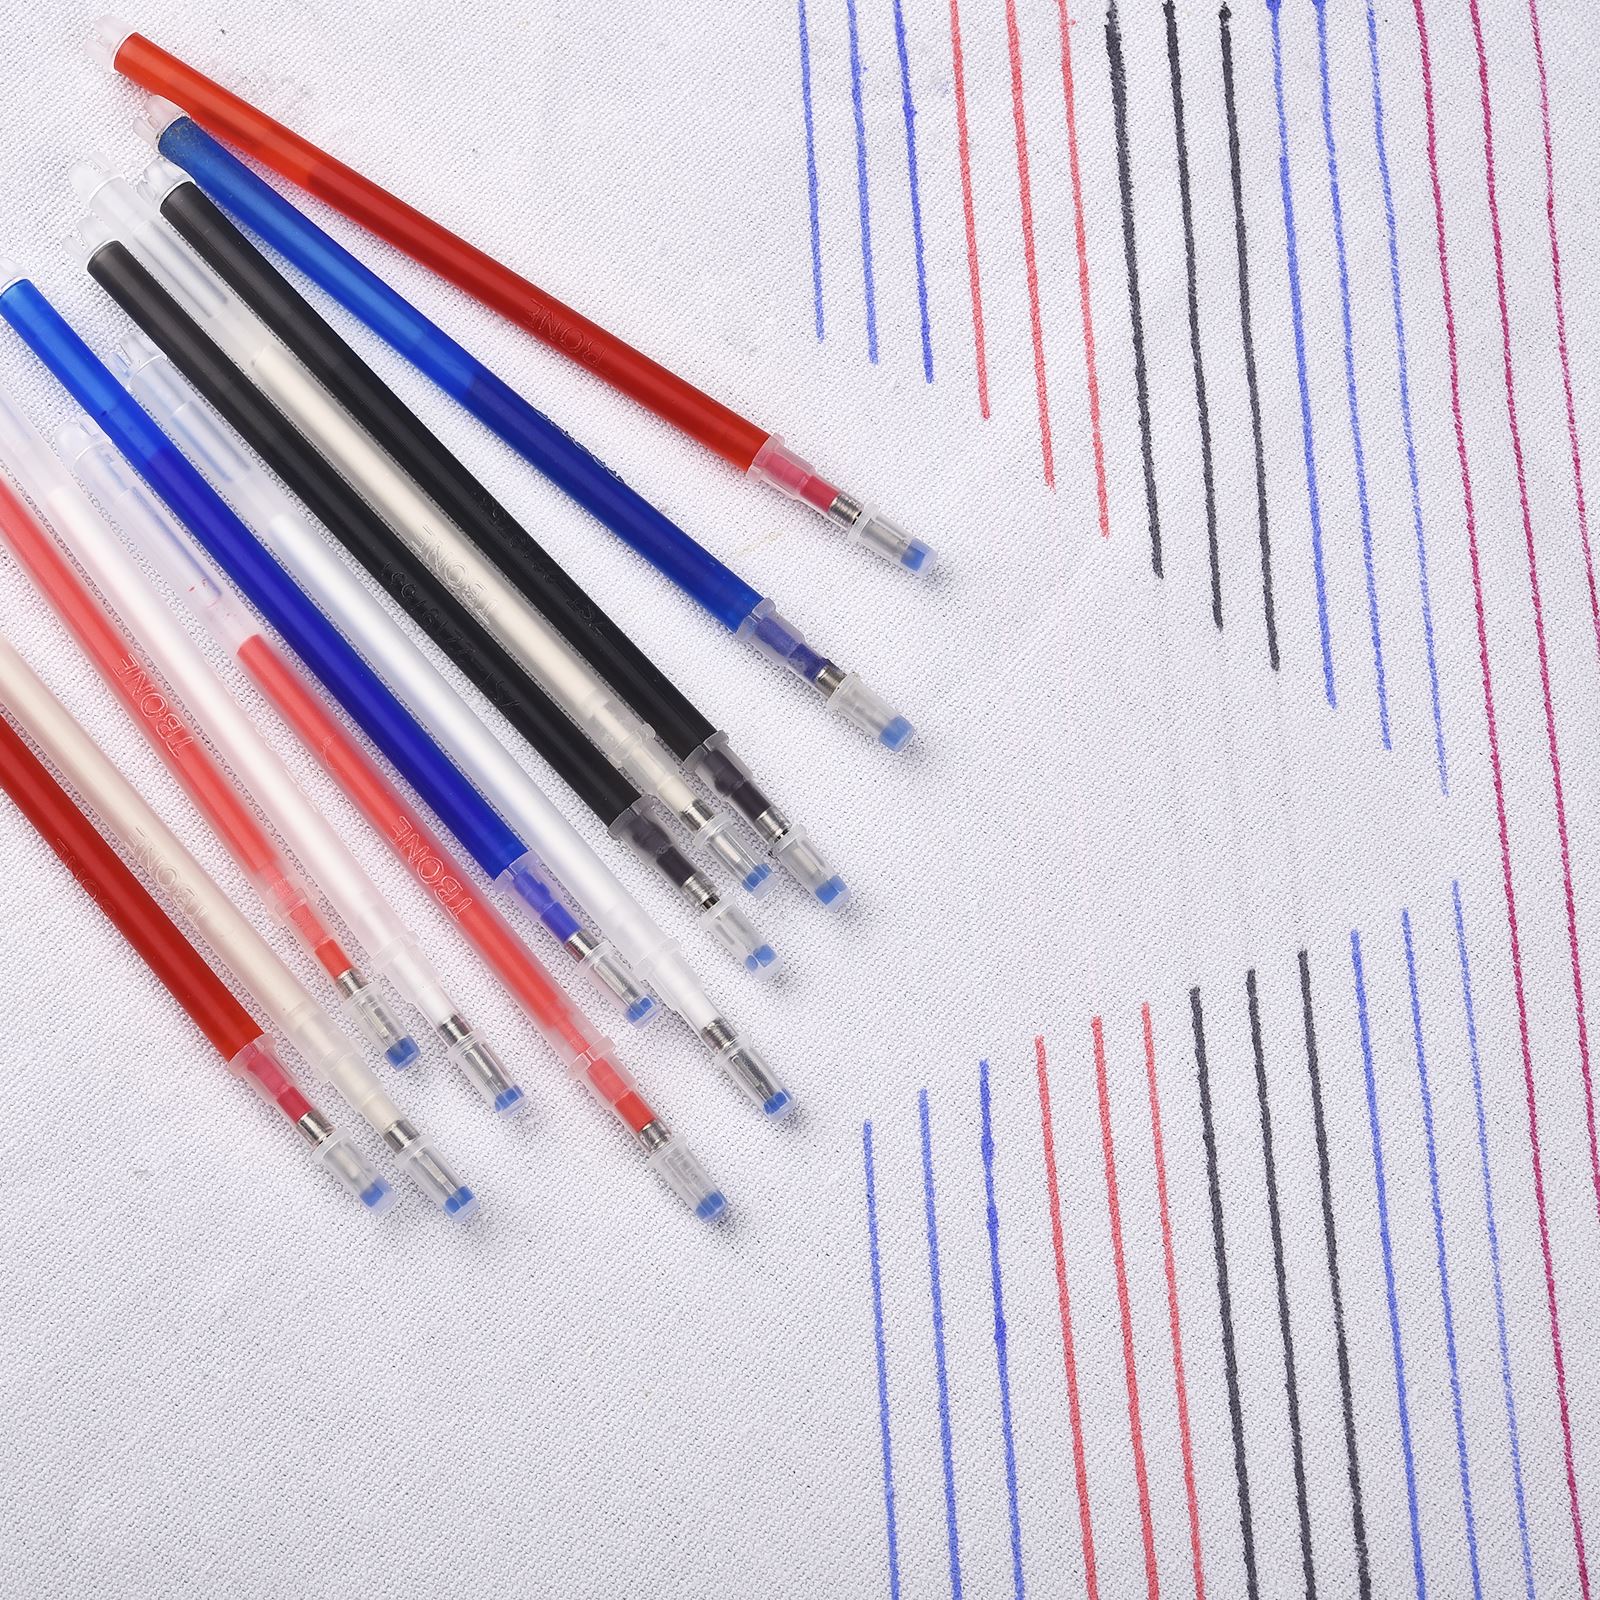 10pcs Water Erasable Ink Disappearing Fabric Marker Refill with